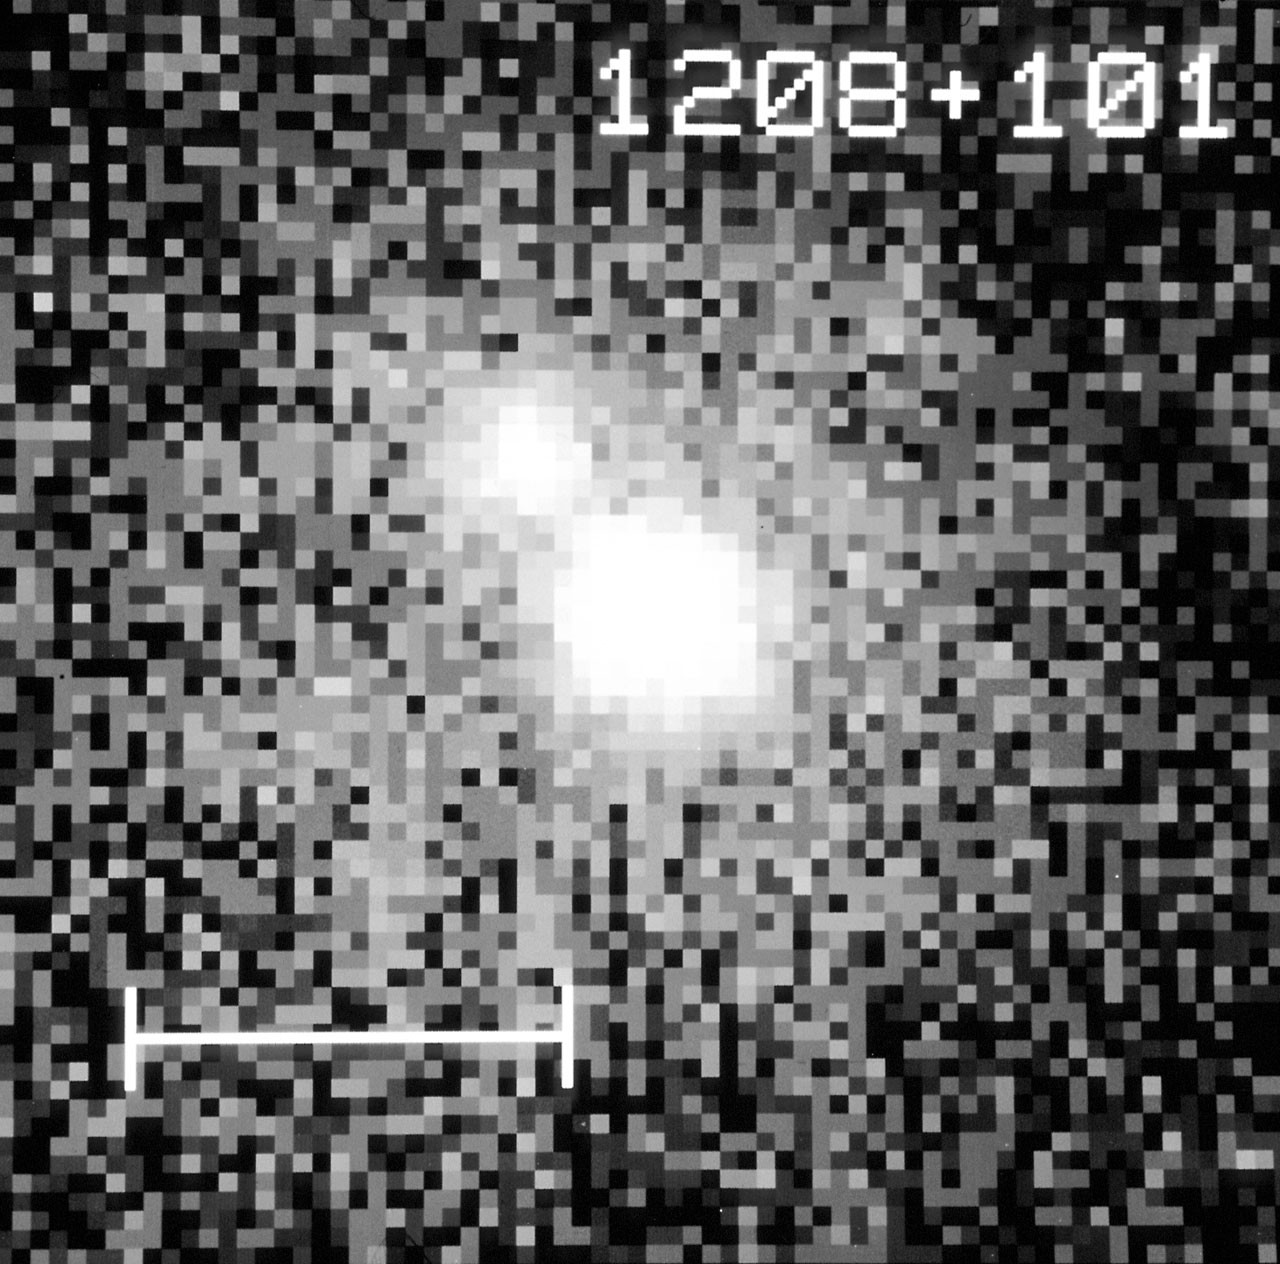 http://www.spacetelescope.org/static/archives/images/screen/opo9203a.jpg